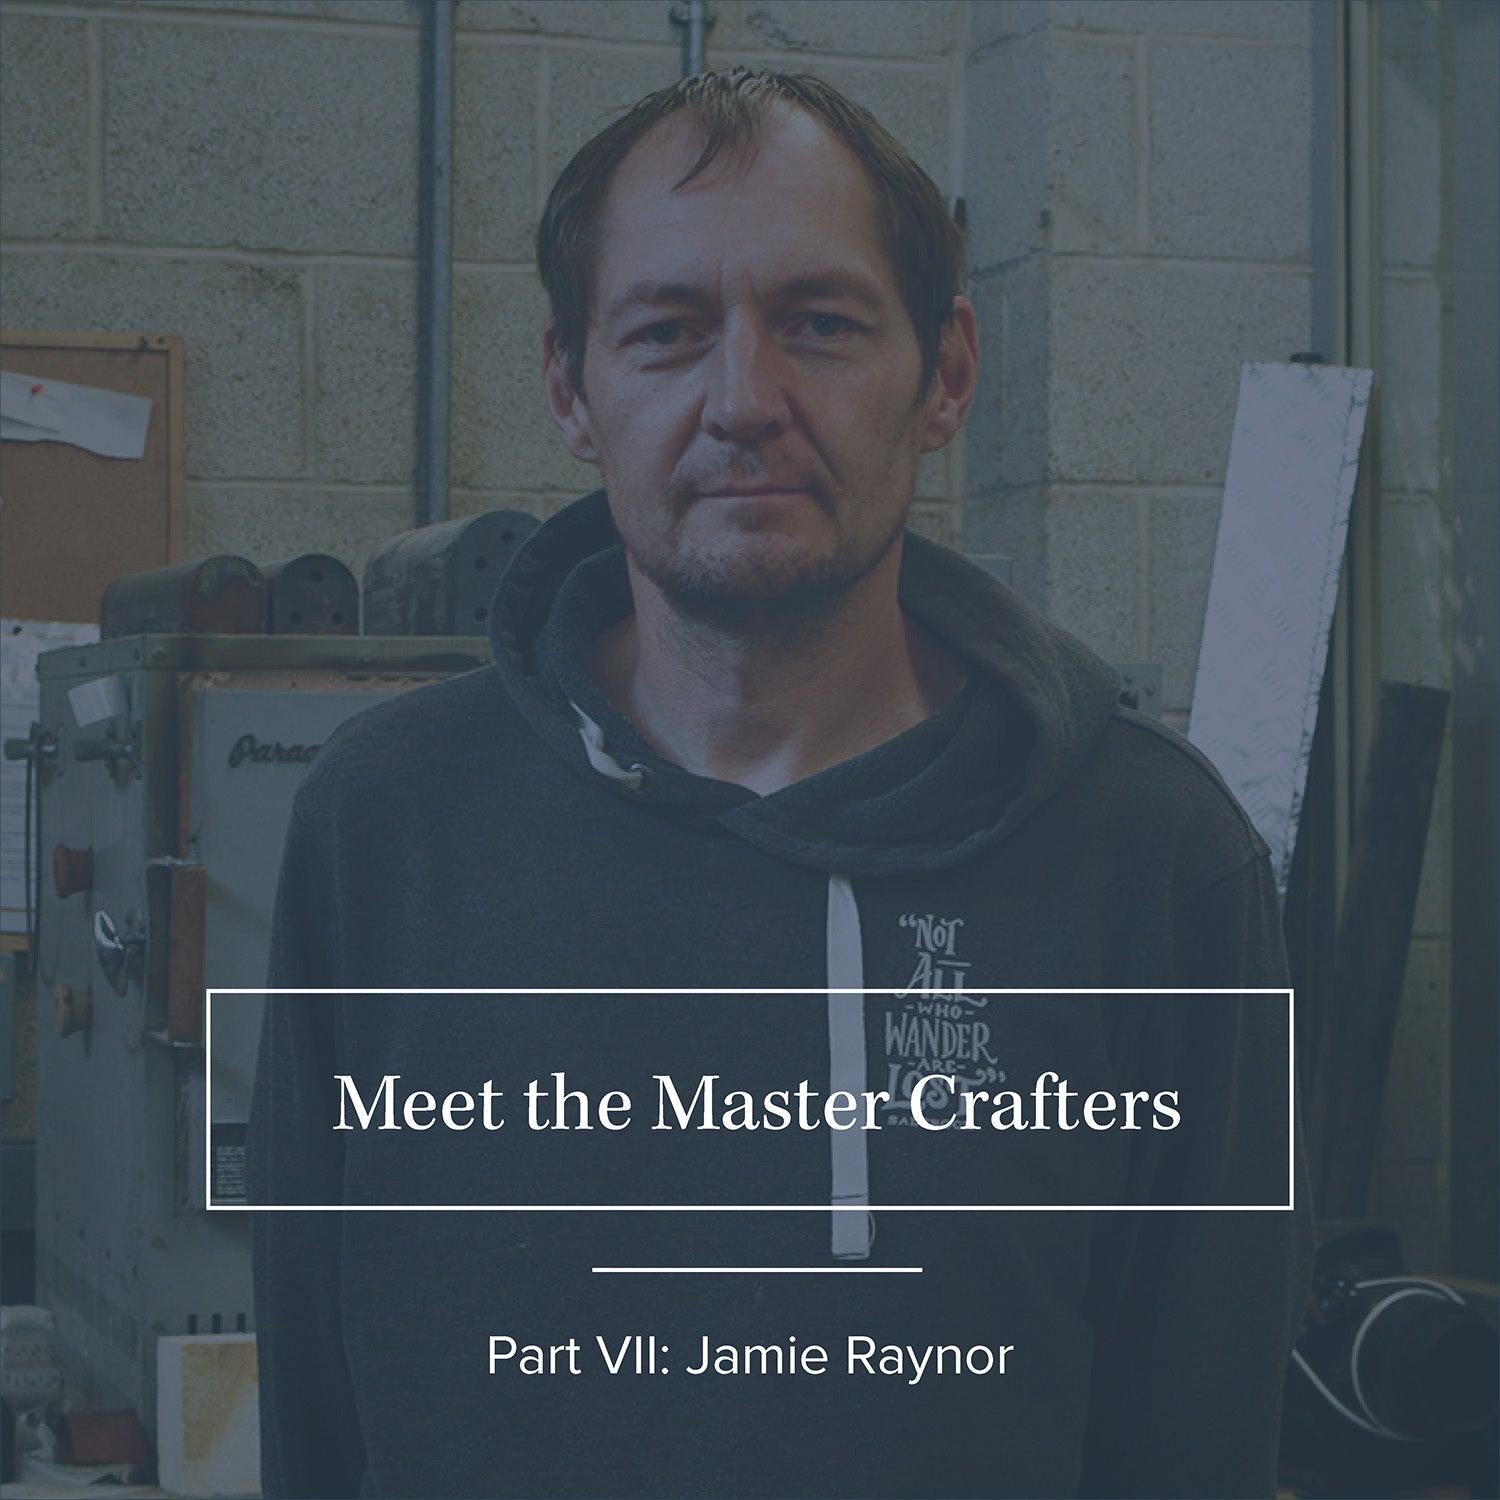 Meet the Master Crafters: Part VII